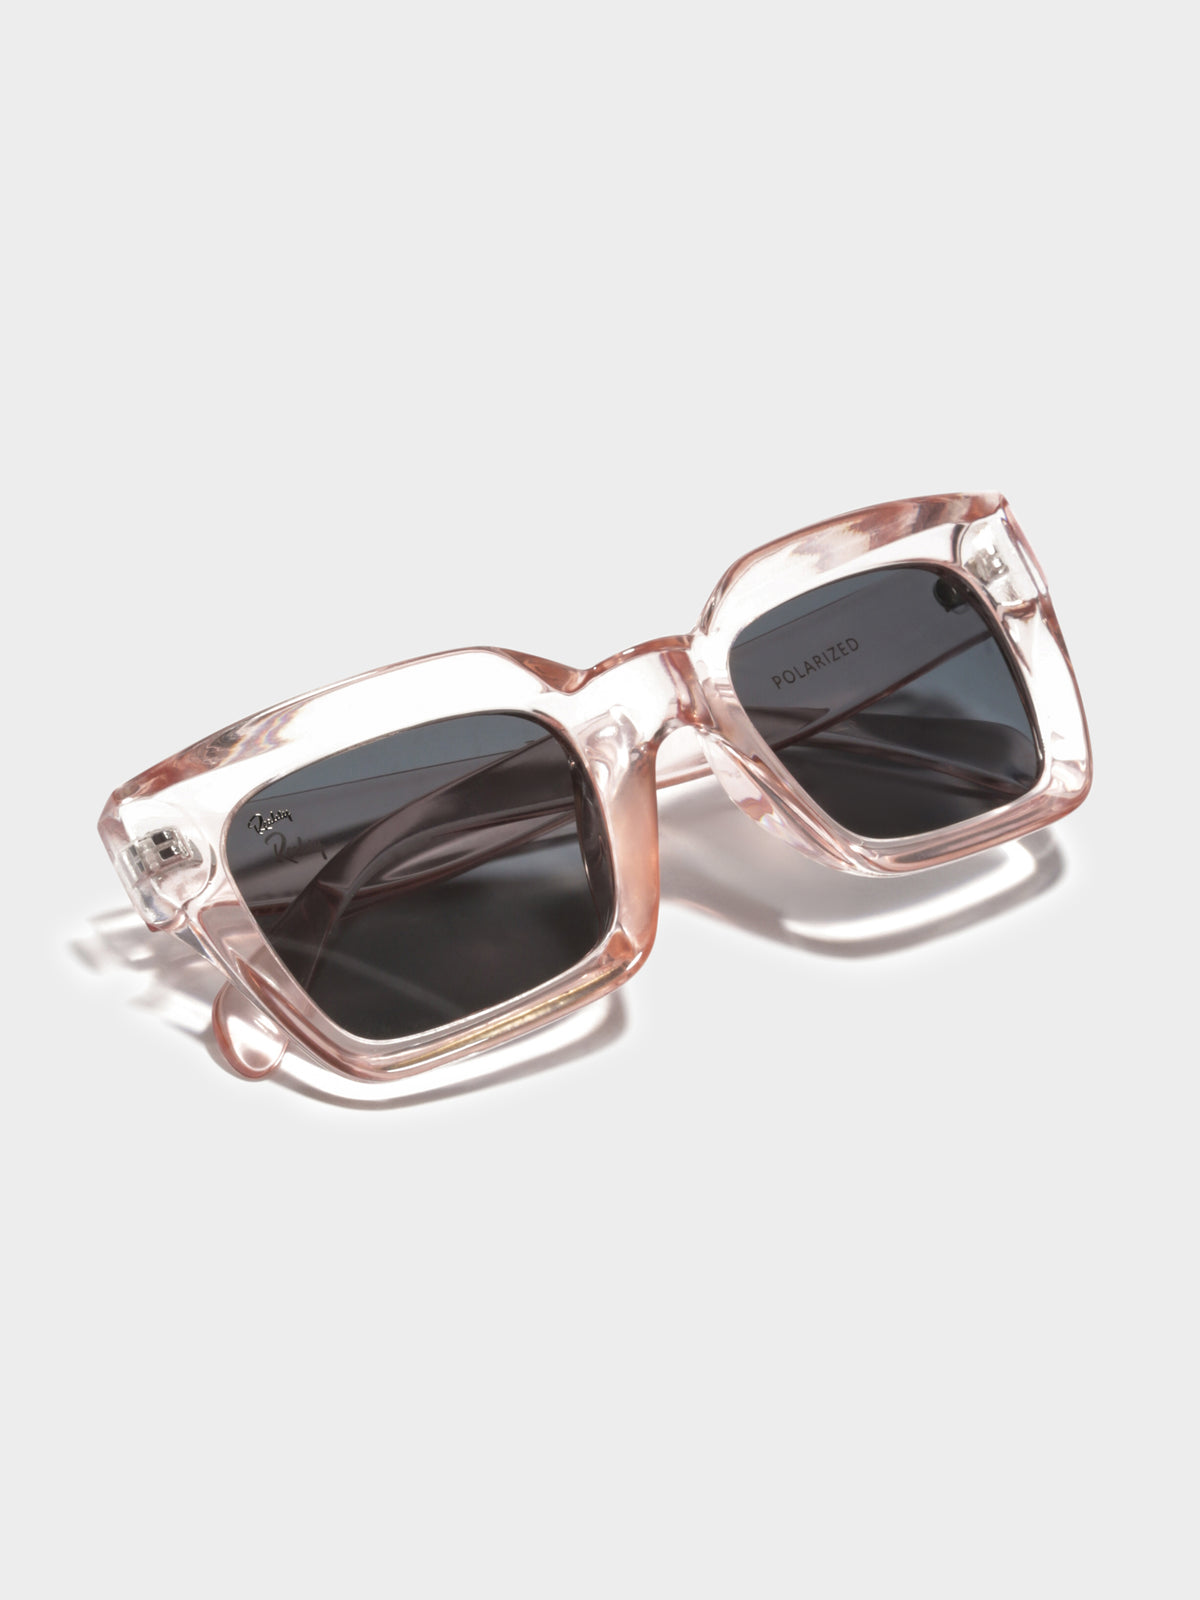 Onassis Square Sunglasses in Berry